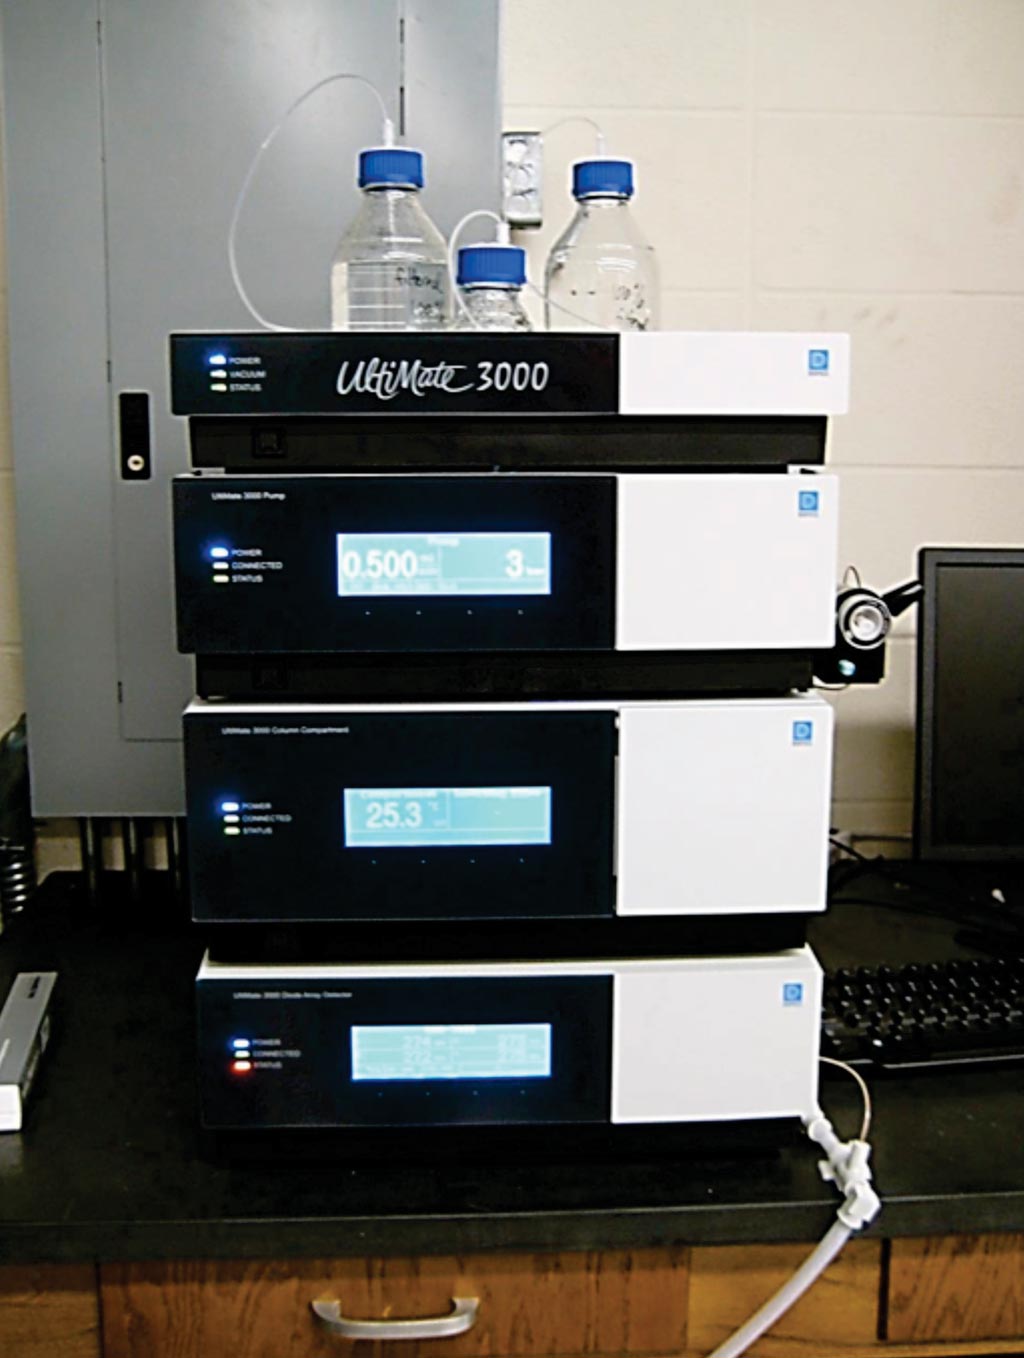 Image: The Dionex Ultimate 3000 high-performance liquid chromatography (HPLC) system (Photo courtesy of the University of Texas at Austin).